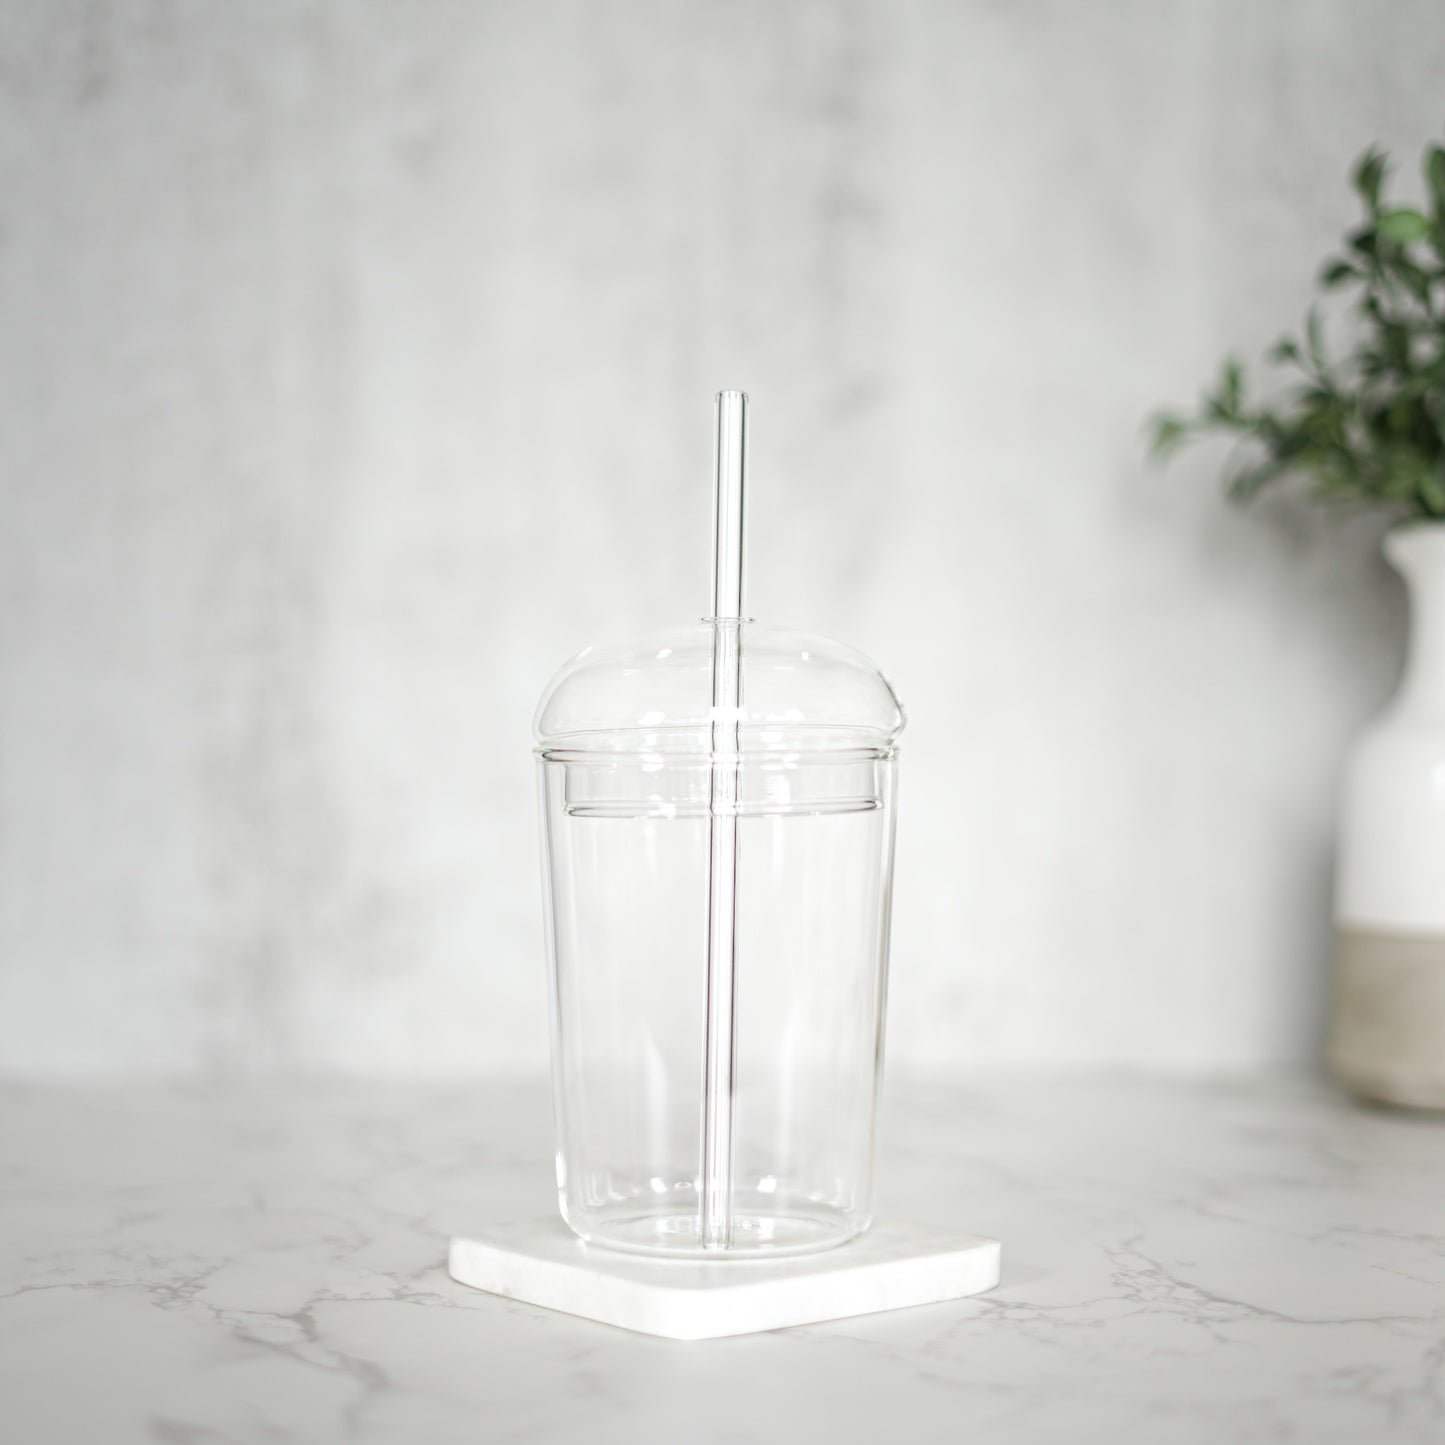 XMMSWDLA Glass Tumbler with Dome Lid for Frappes, Smoothies & Iced